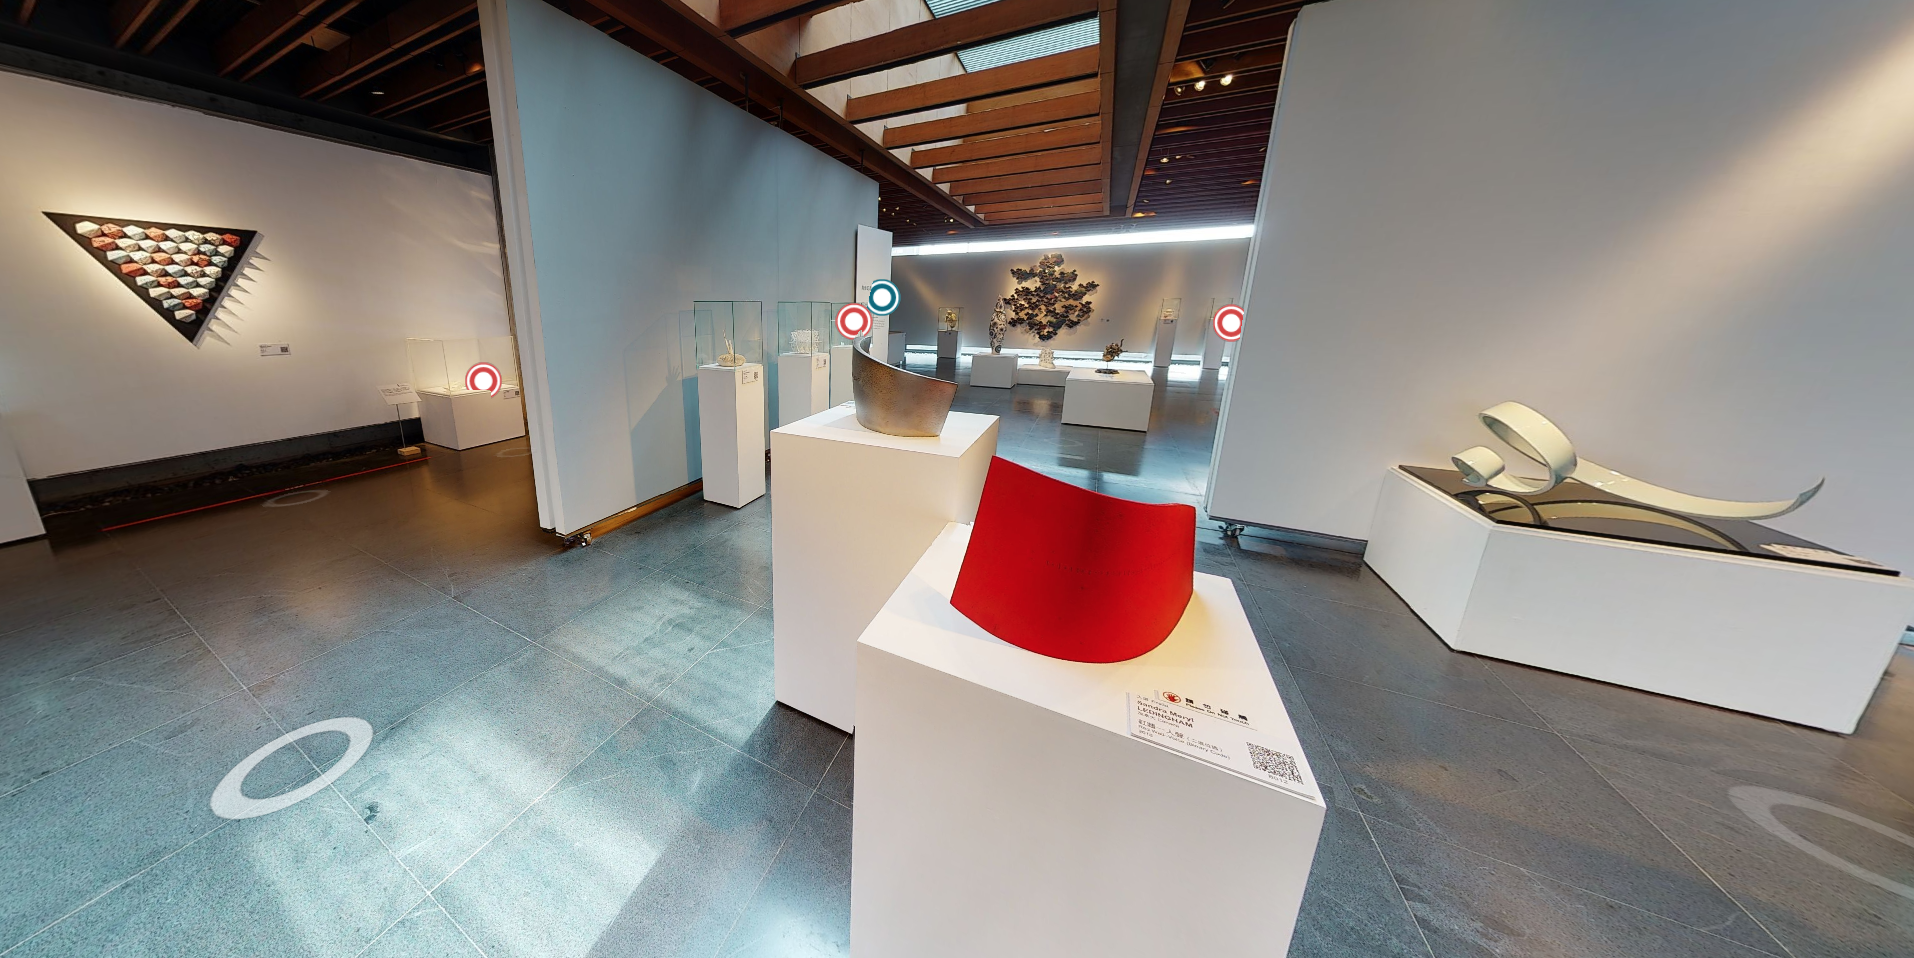  Still of my work from the beautiful exhibition in the New Taipei City Yingge Ceramics Museum, from Virtual Tour of The Taiwan Ceramic Biennale 2020, from Nov 20 to May 21.    https://my.matterport.com/show/?m=C2sq321tDP1&amp;lang=se     